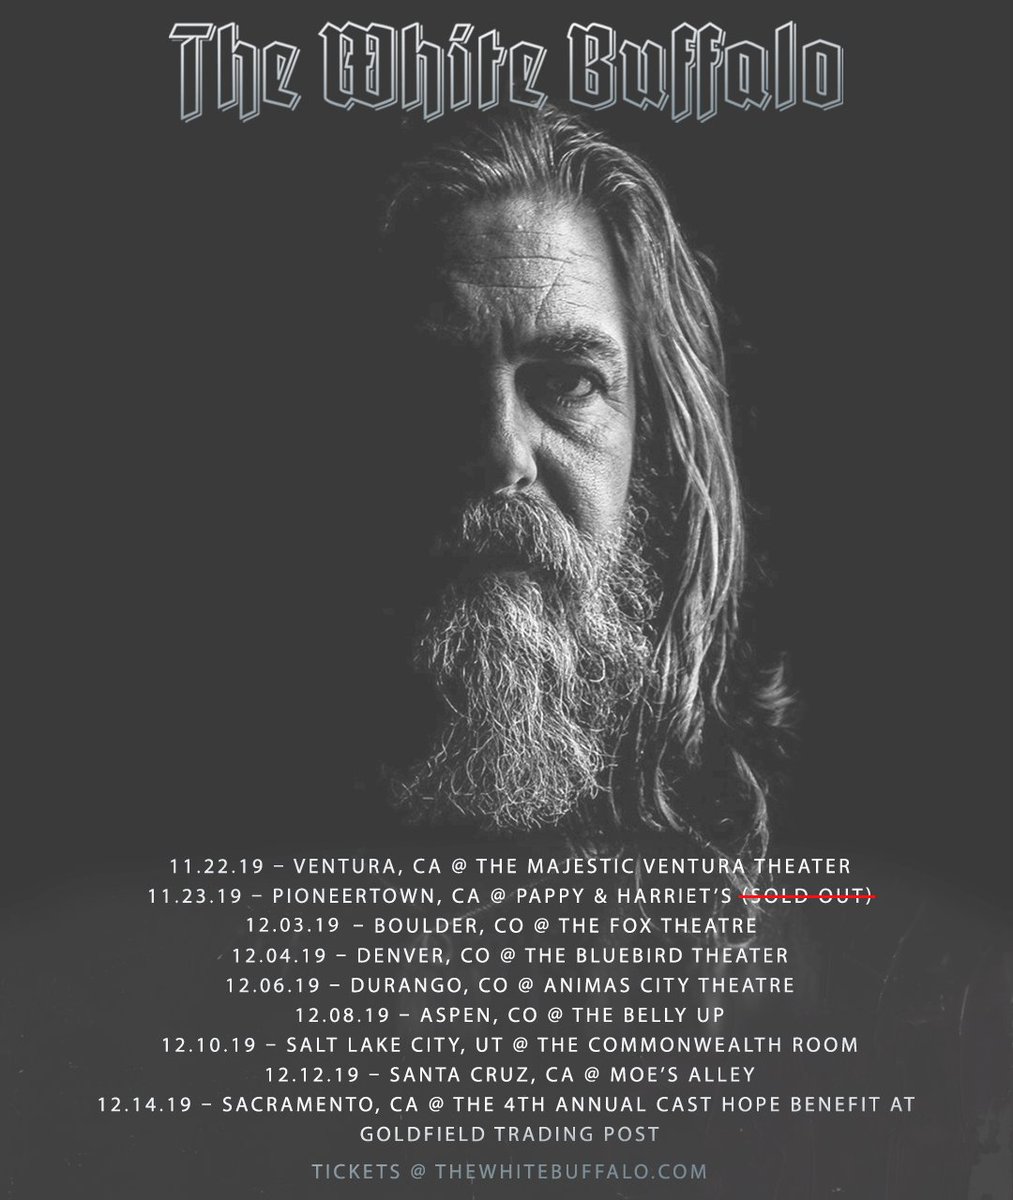 Alvorlig Fundament Advent The White Buffalo on Twitter: "Final shows of 2019 on sale now!! Tix  available at https://t.co/wGLMJAtbVP https://t.co/I36Y3sGDt3" / Twitter